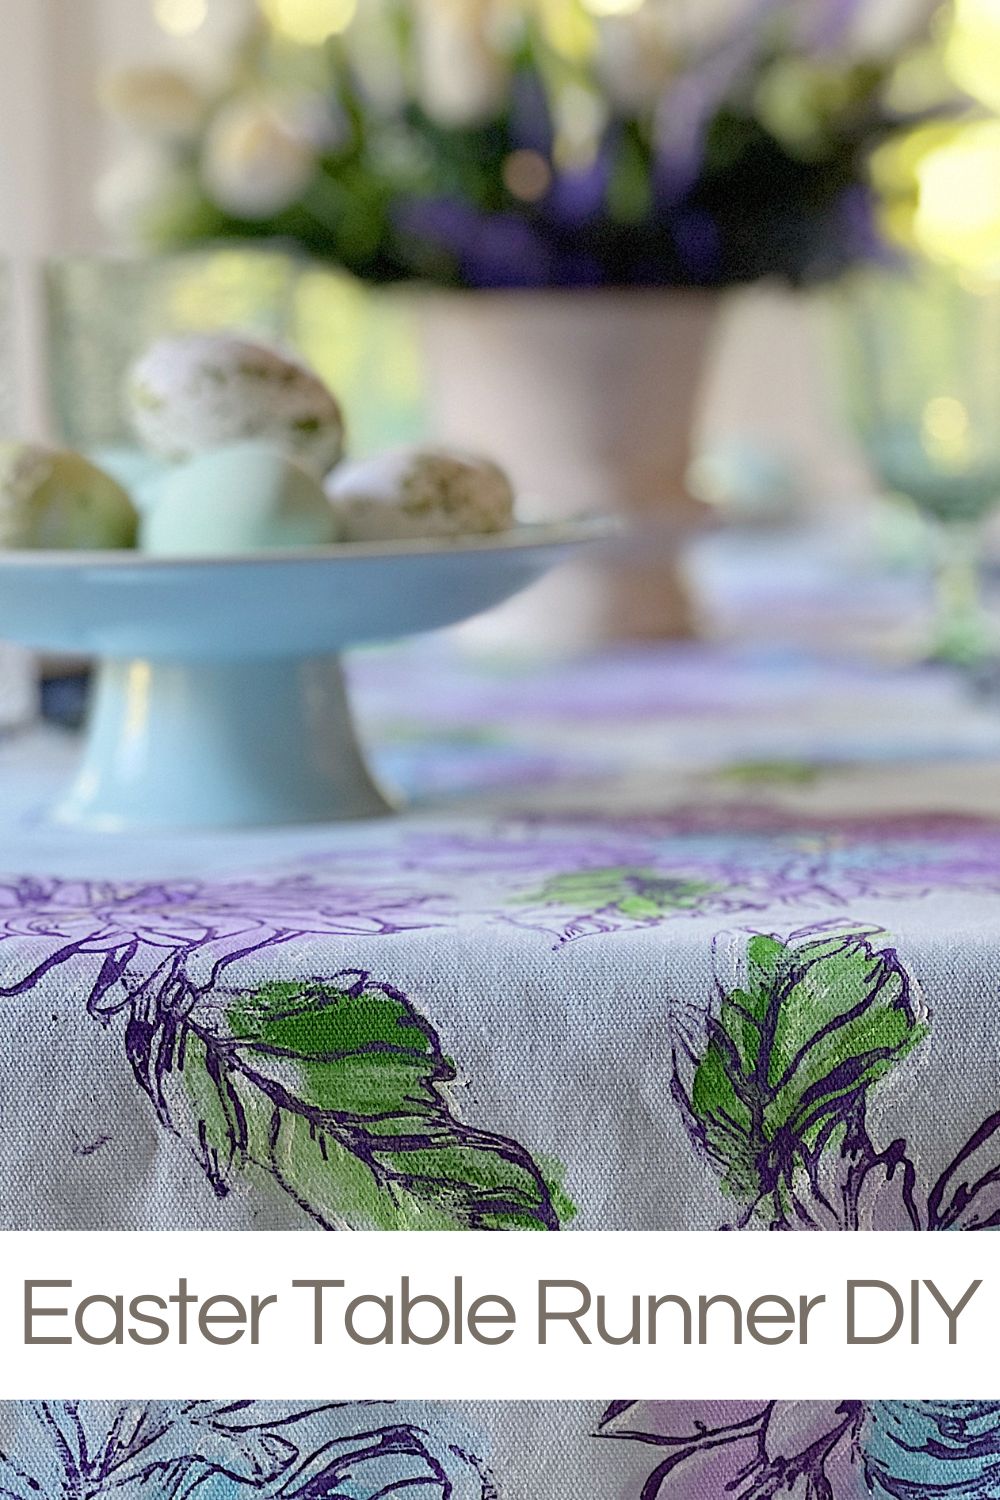 I made a beautiful Spring Easter Table Runner using my newest technique I call paint and stamp. There is very little artistic skill required. 